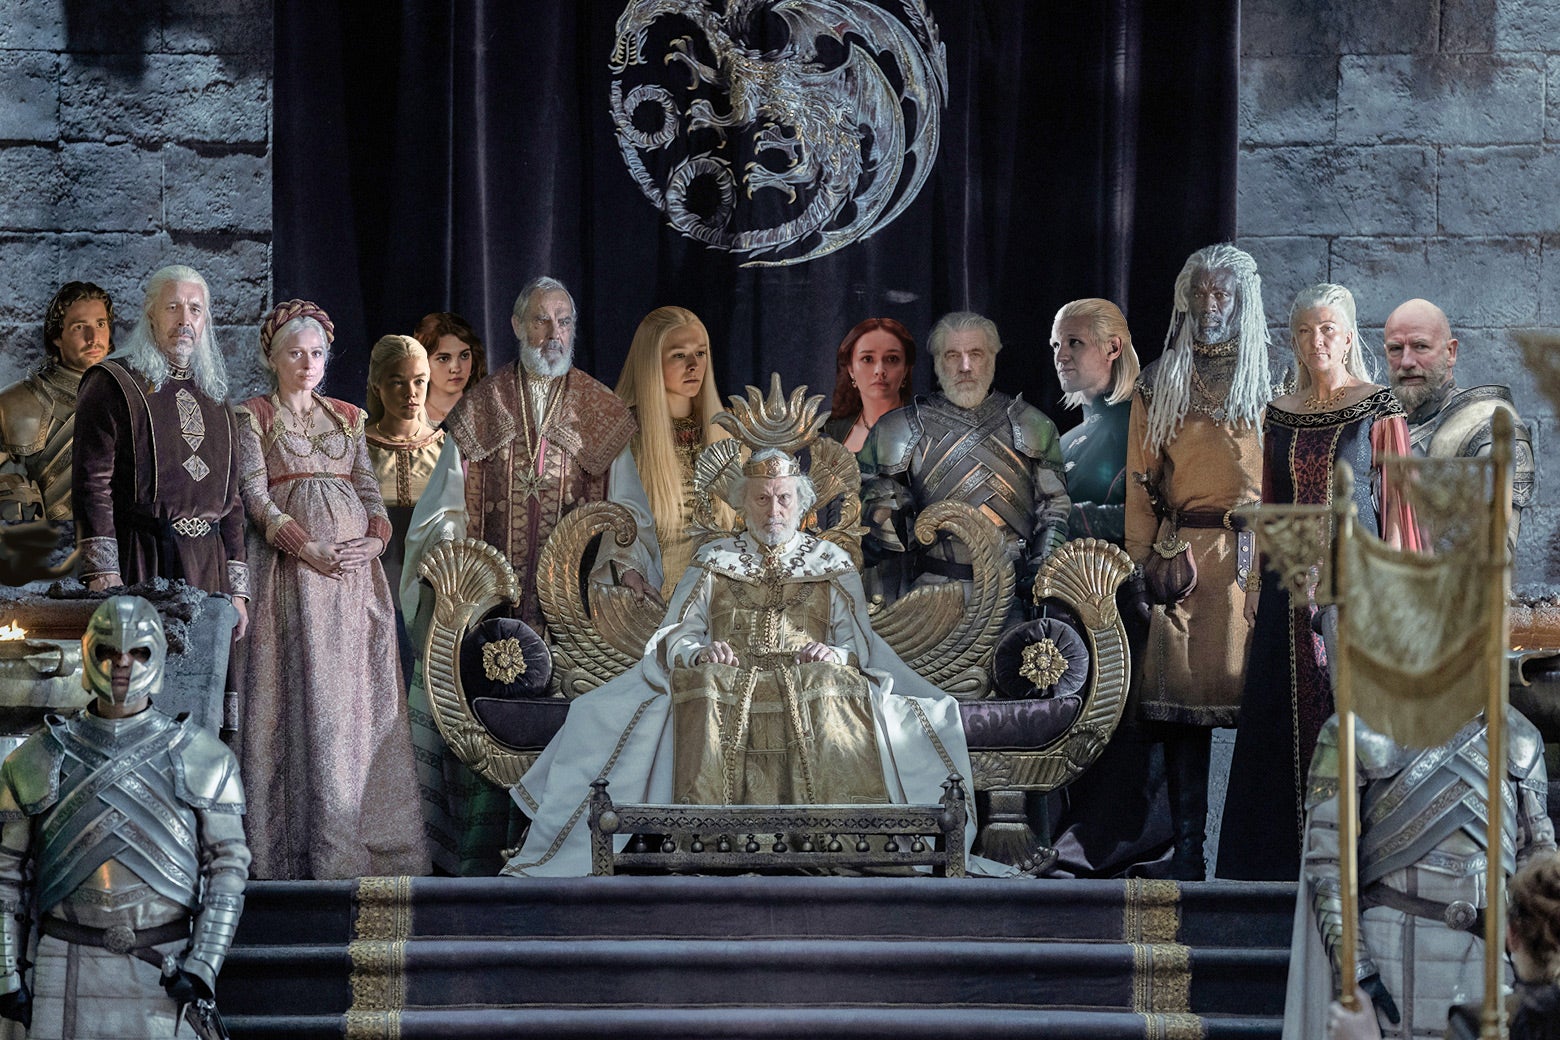 A still shows a royal court with a dragon seal, Jaehaerys on the throne and, photoshopped around him, just about every single person in the first episode of House of the Dragon